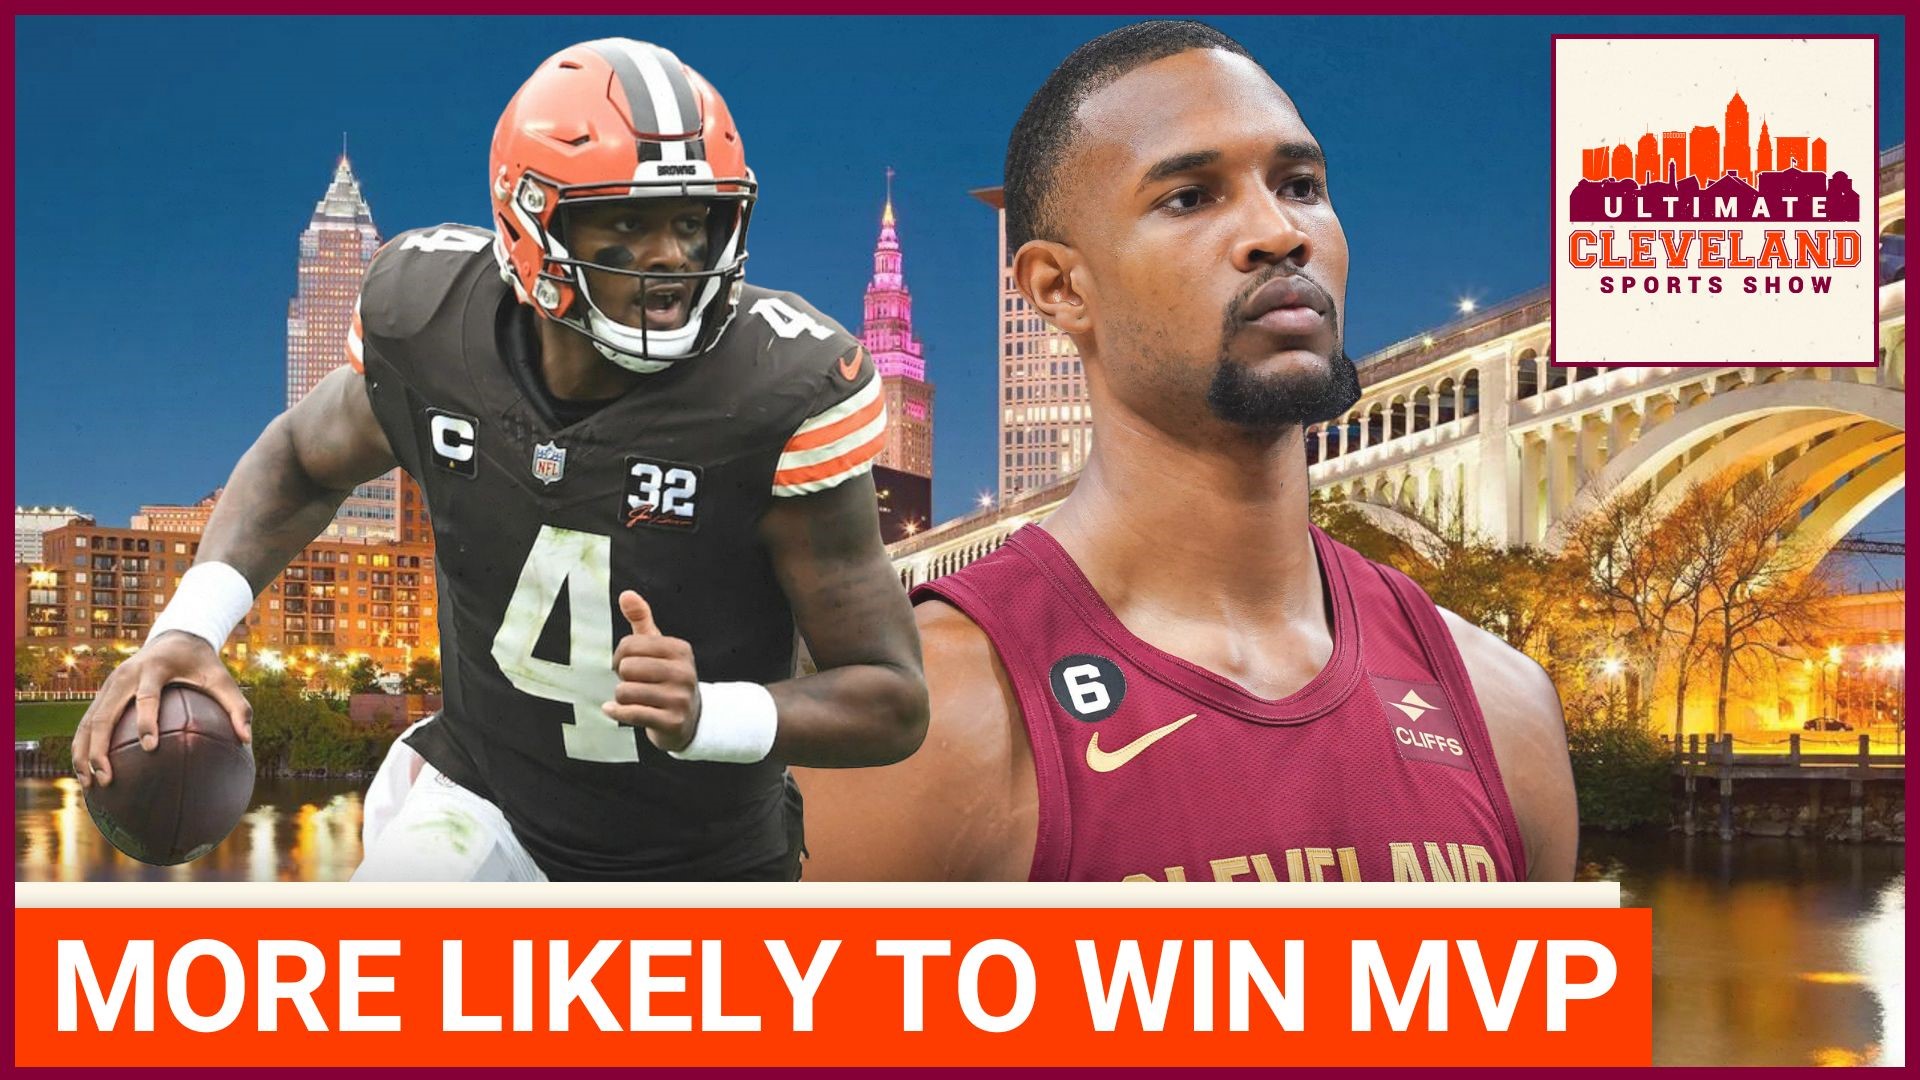 Who is most likely to get MVP votes before the end of their career, Deshaun Watson or Evan Mobley?